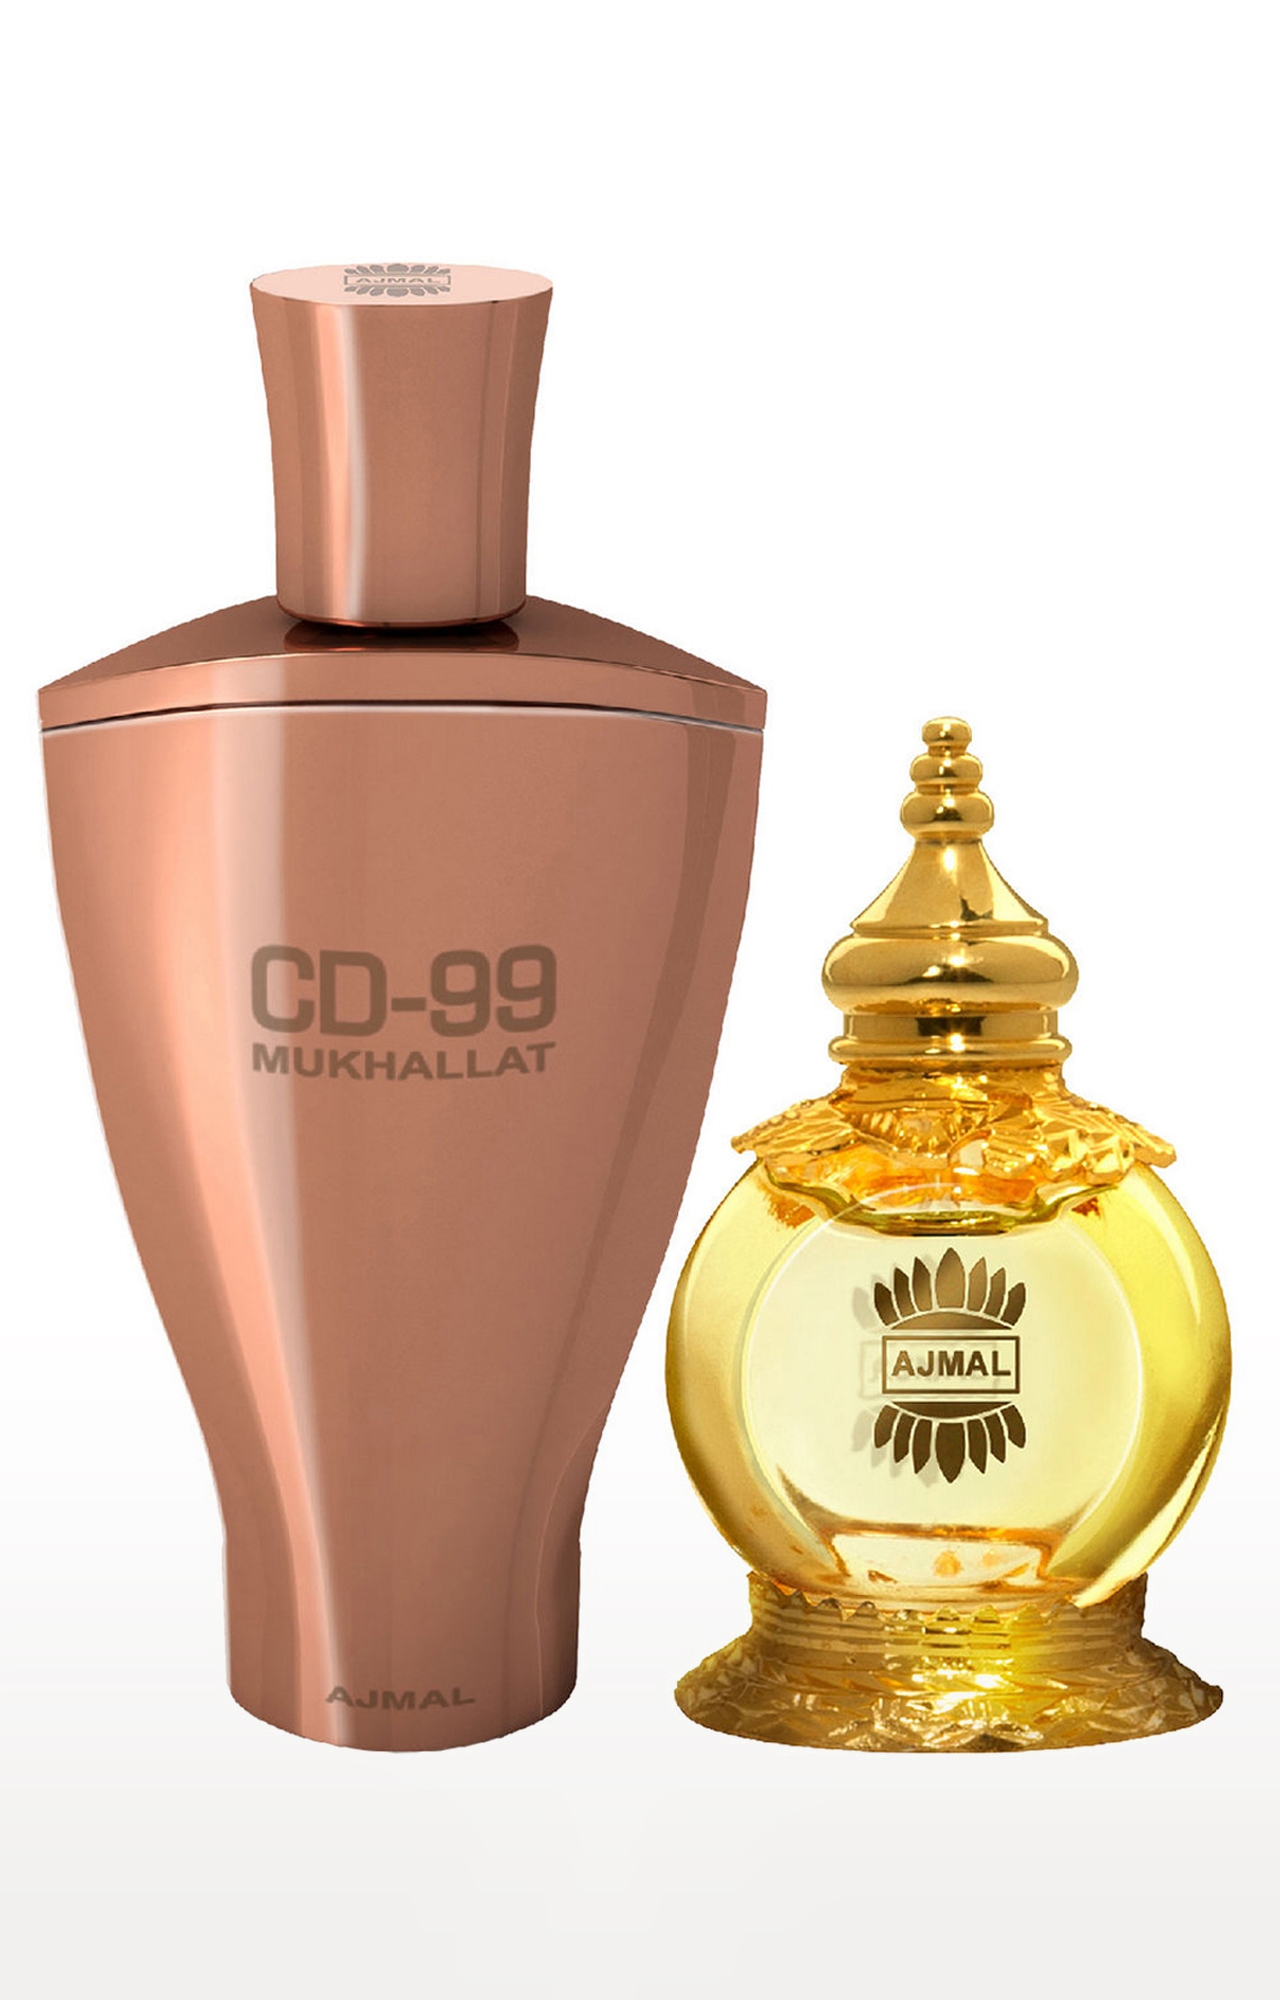 Ajmal CD 99 Mukhallat Concentrated Perfume Oil Oriental Alcohol-free Attar 14ml for Unisex and Mukhallat AL Wafa Concentrated Perfume Oil Oriental Musky Alcohol-free Attar 12ml for Unisex